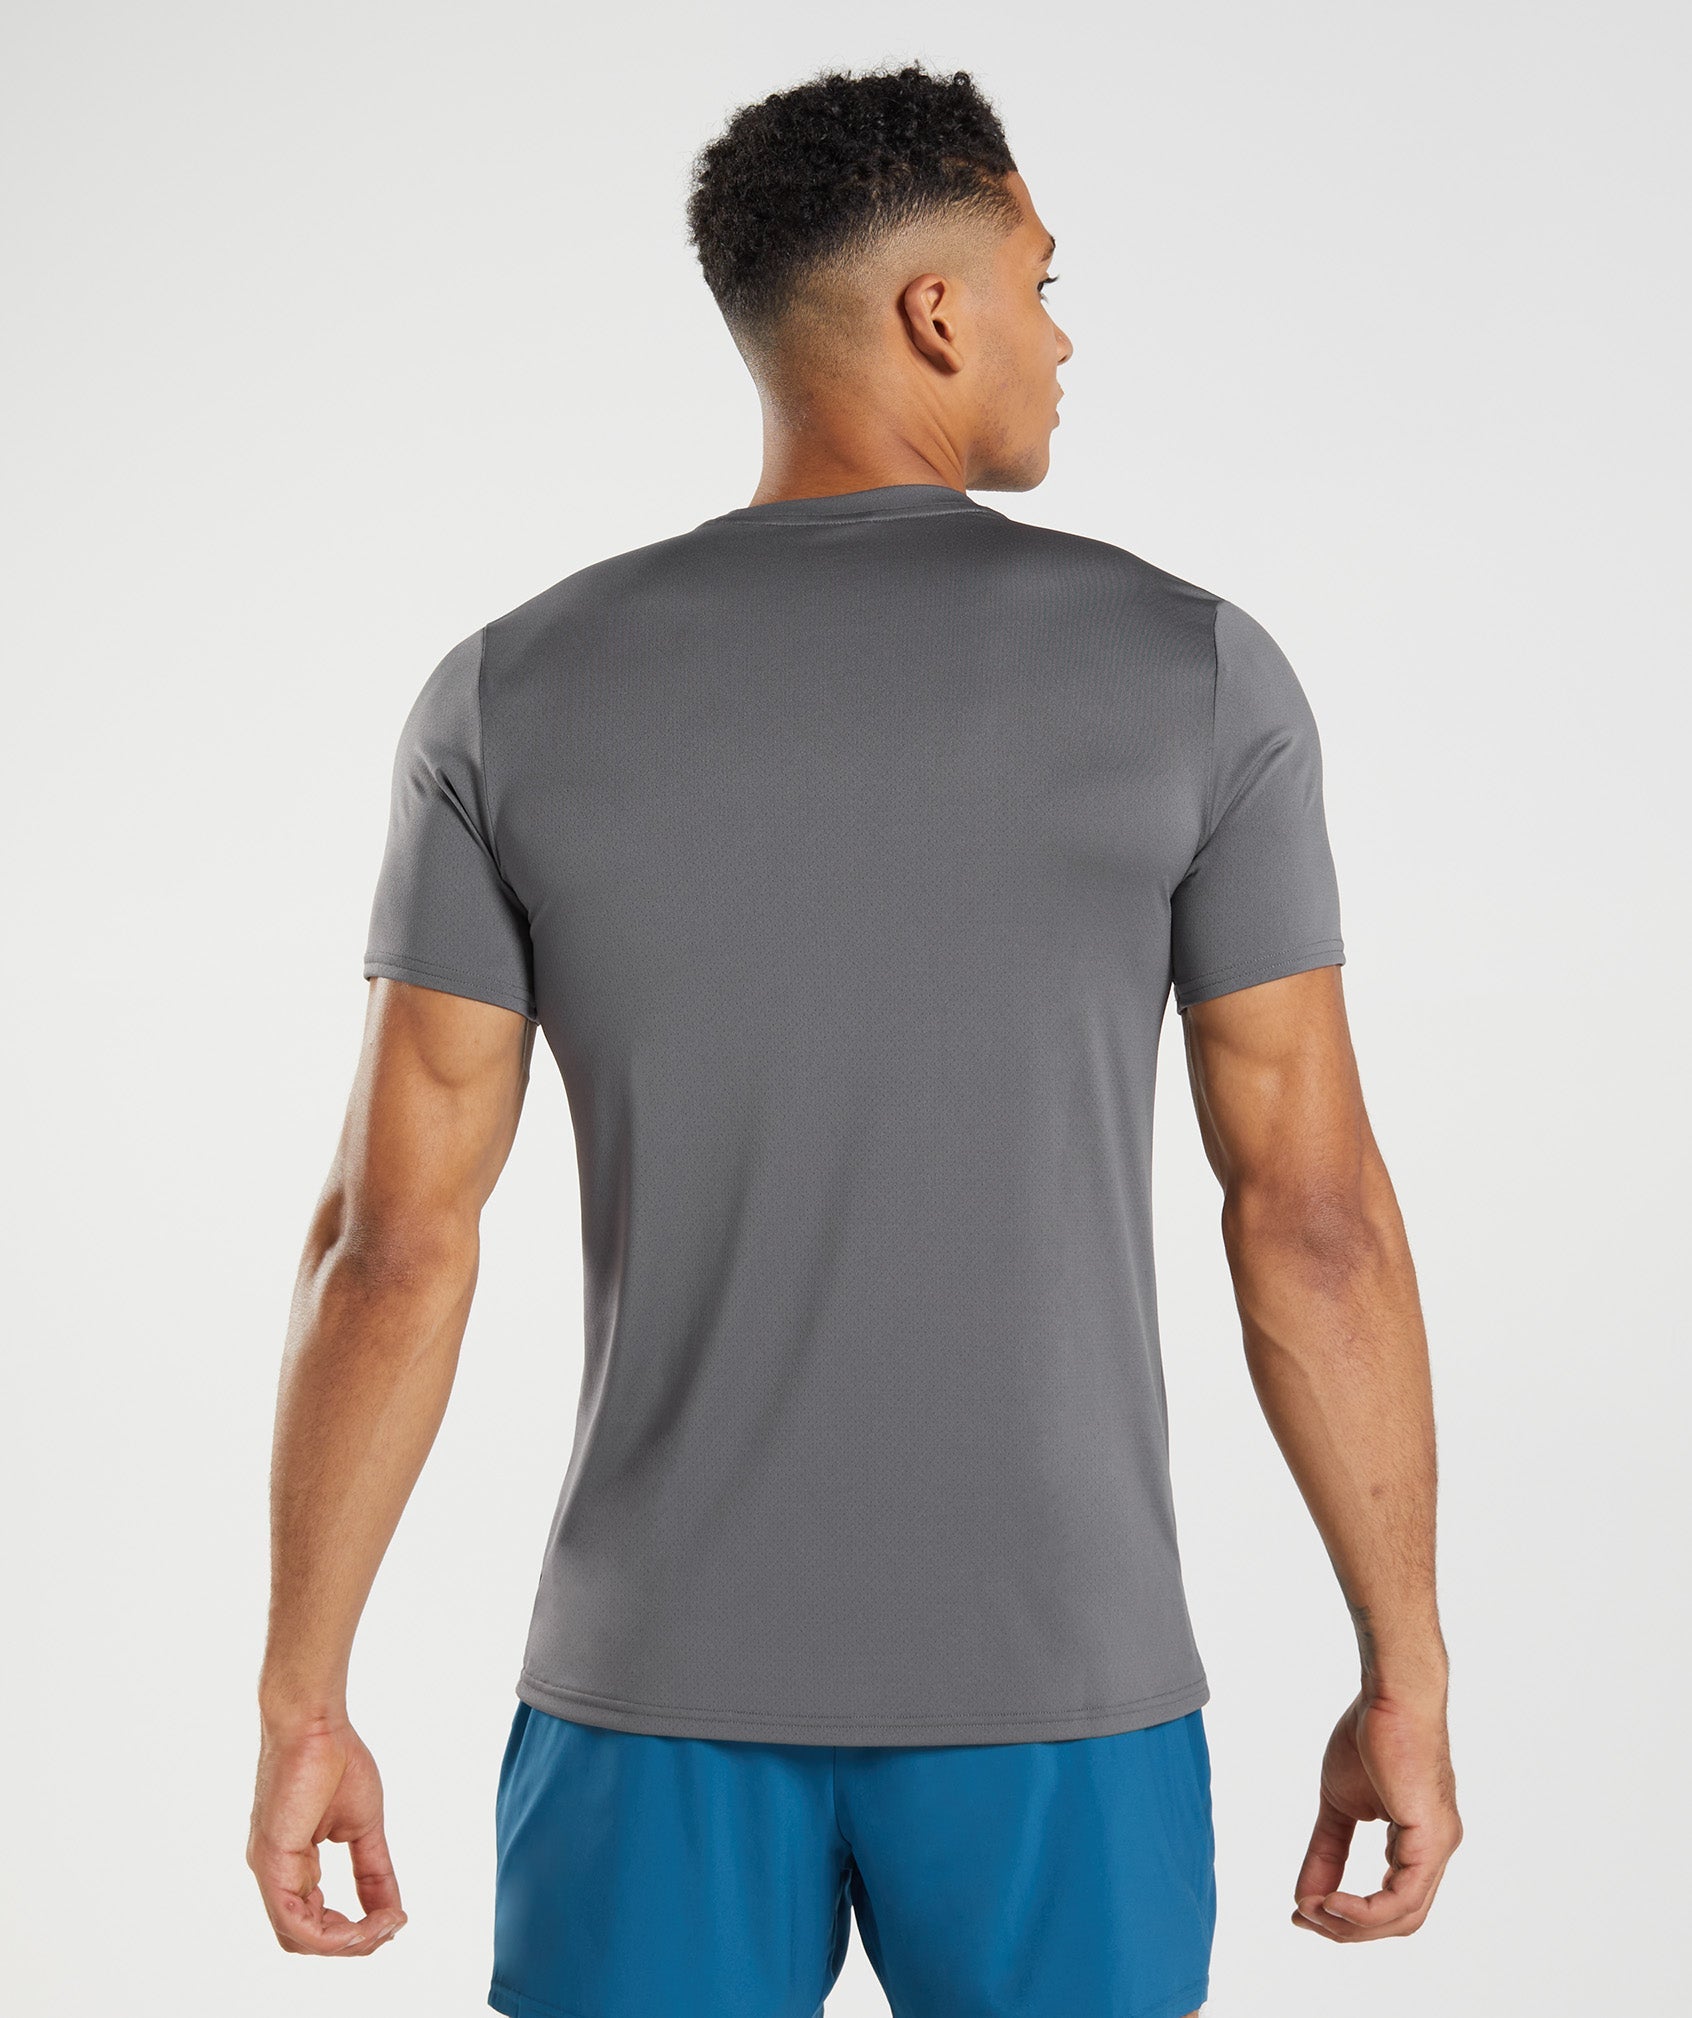 Arrival T-Shirt in Silhouette Grey